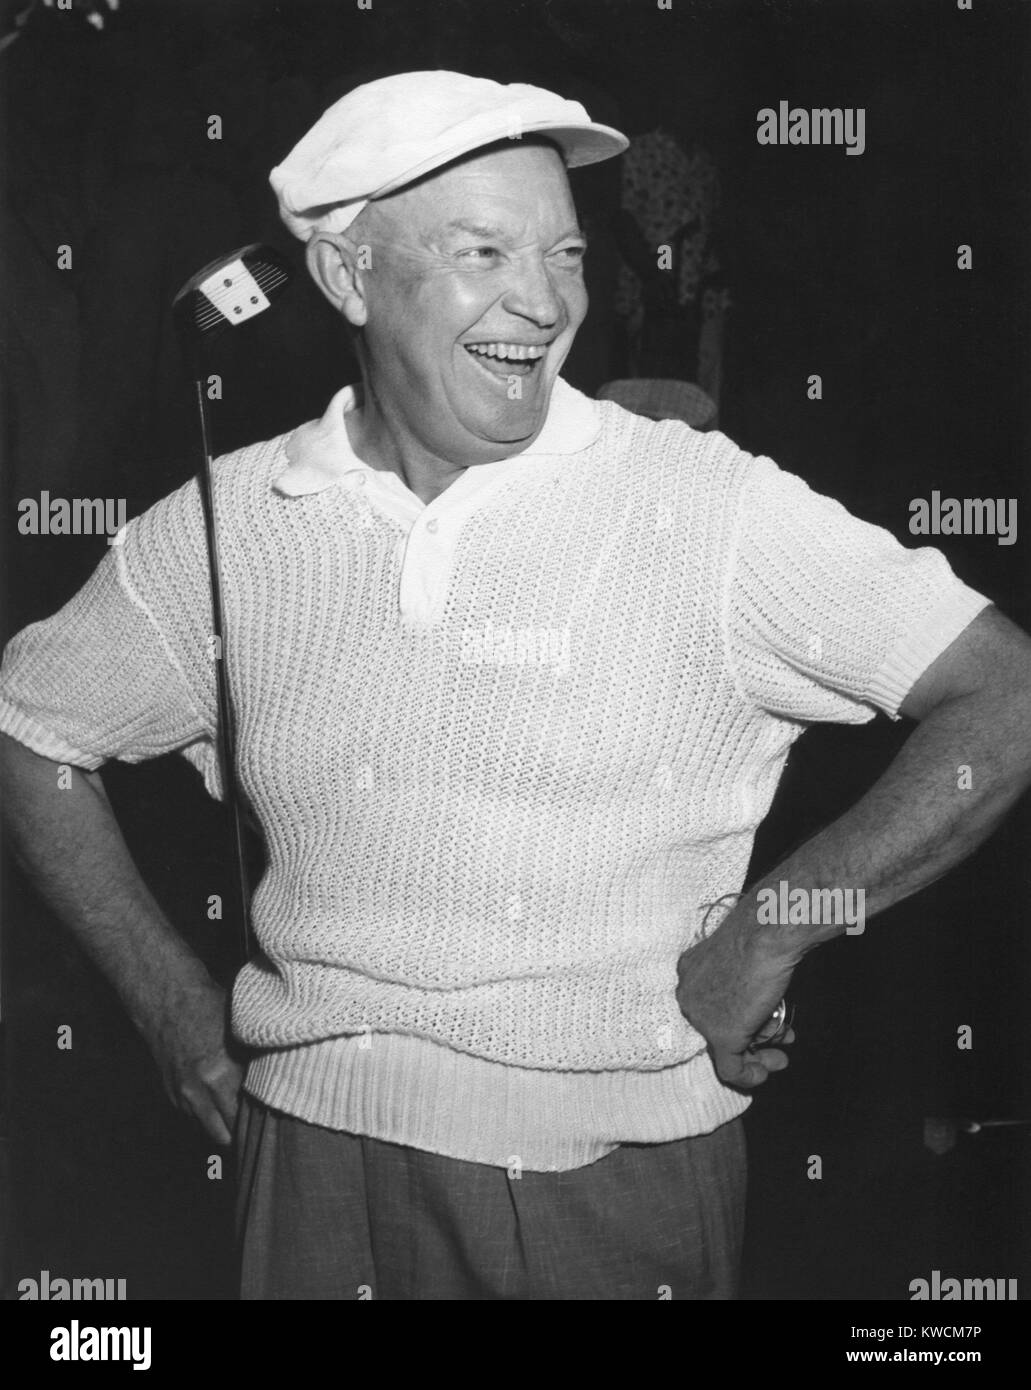 President Dwight Eisenhower smiling while golfing. Ca. 1954. - (BSLOC 2014 14 33) Stock Photo